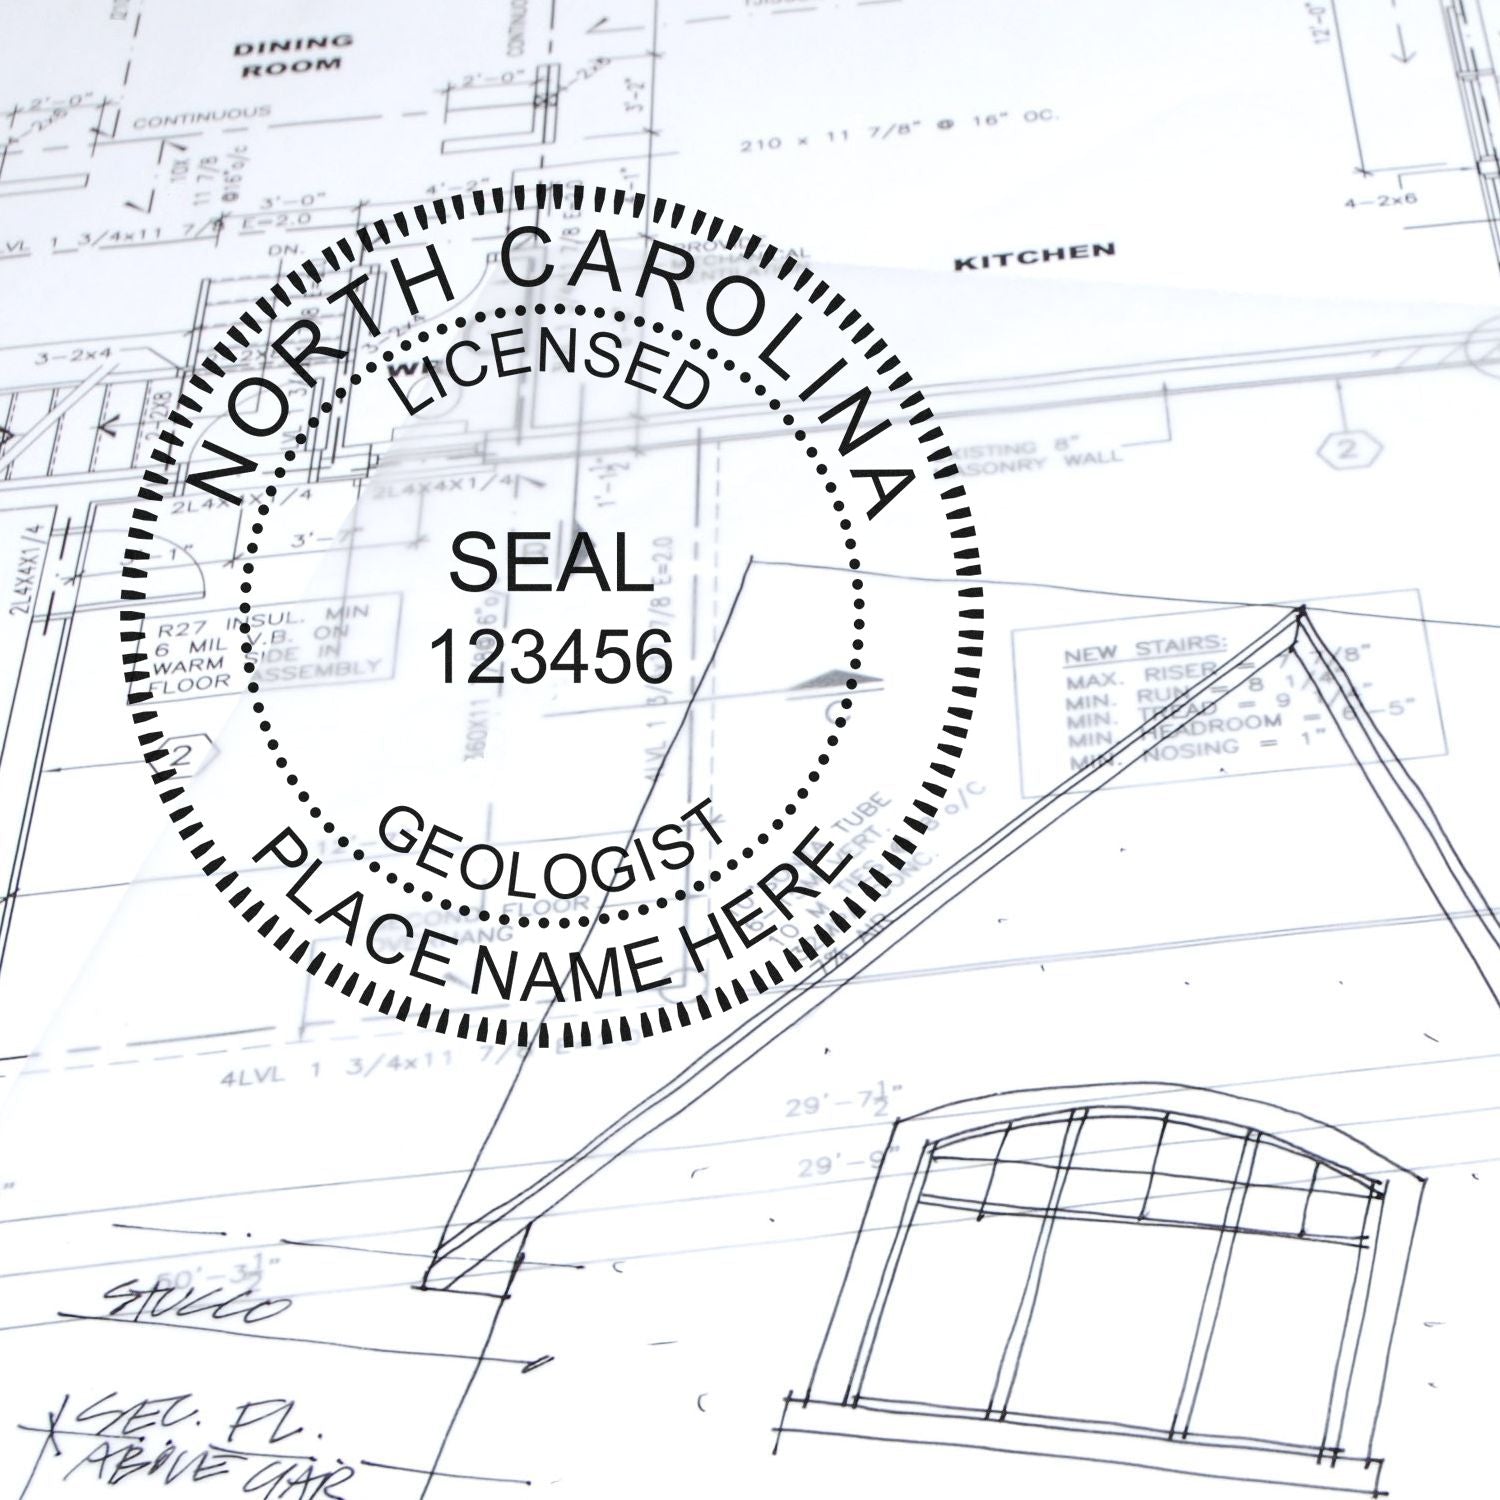 A photograph of the Digital North Carolina Geologist Stamp, Electronic Seal for North Carolina Geologist stamp impression reveals a vivid, professional image of the on paper.